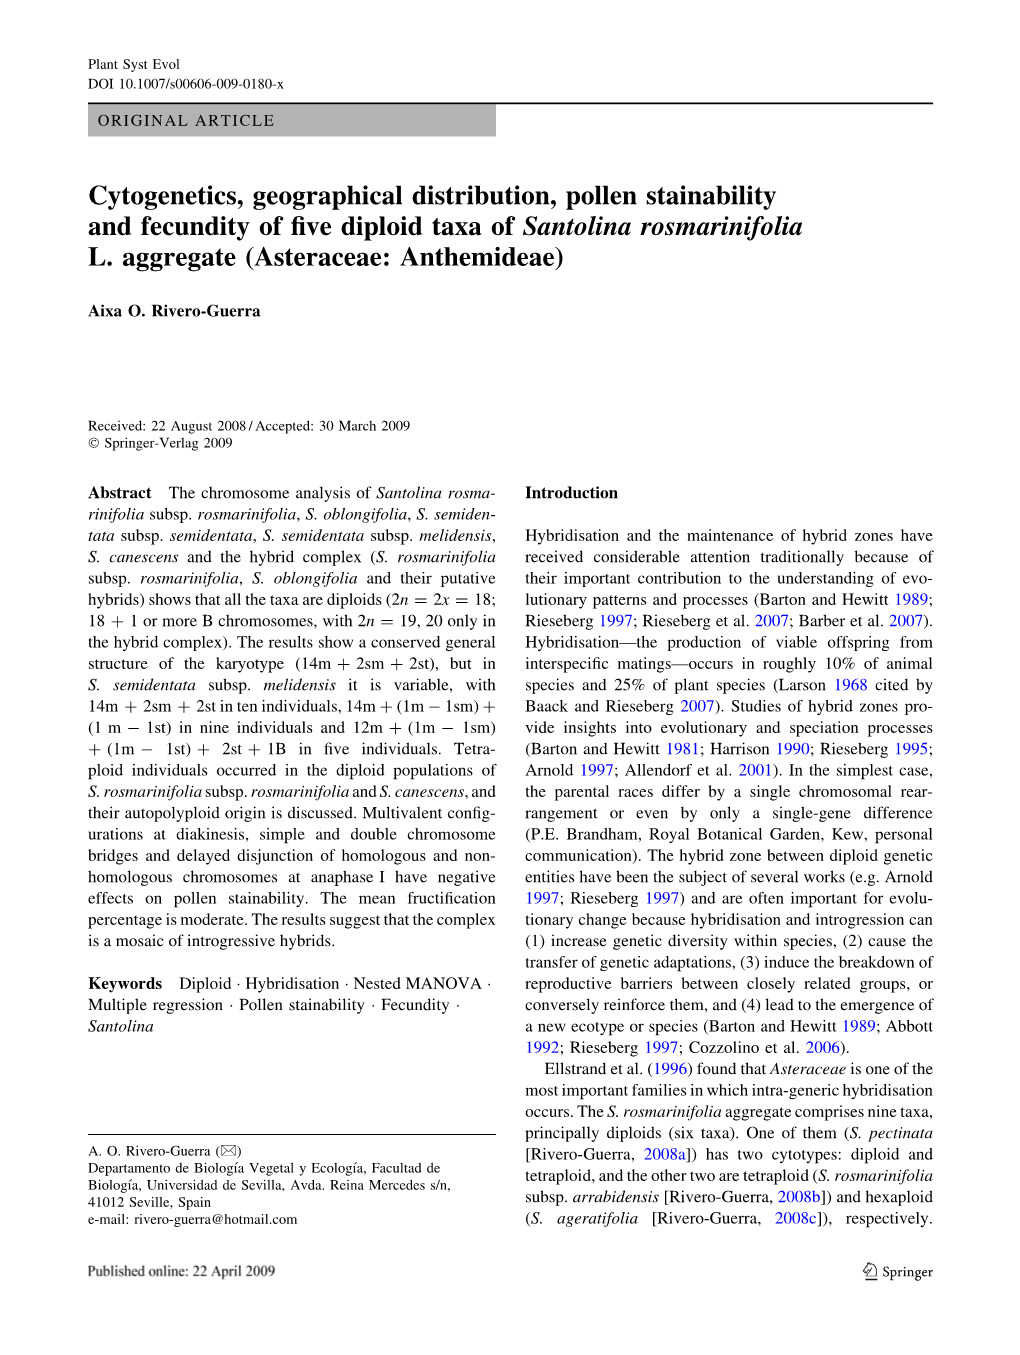 Cytogenetics, Geographical Distribution, Pollen Stainability and Fecundity of ﬁve Diploid Taxa of Santolina Rosmarinifolia L